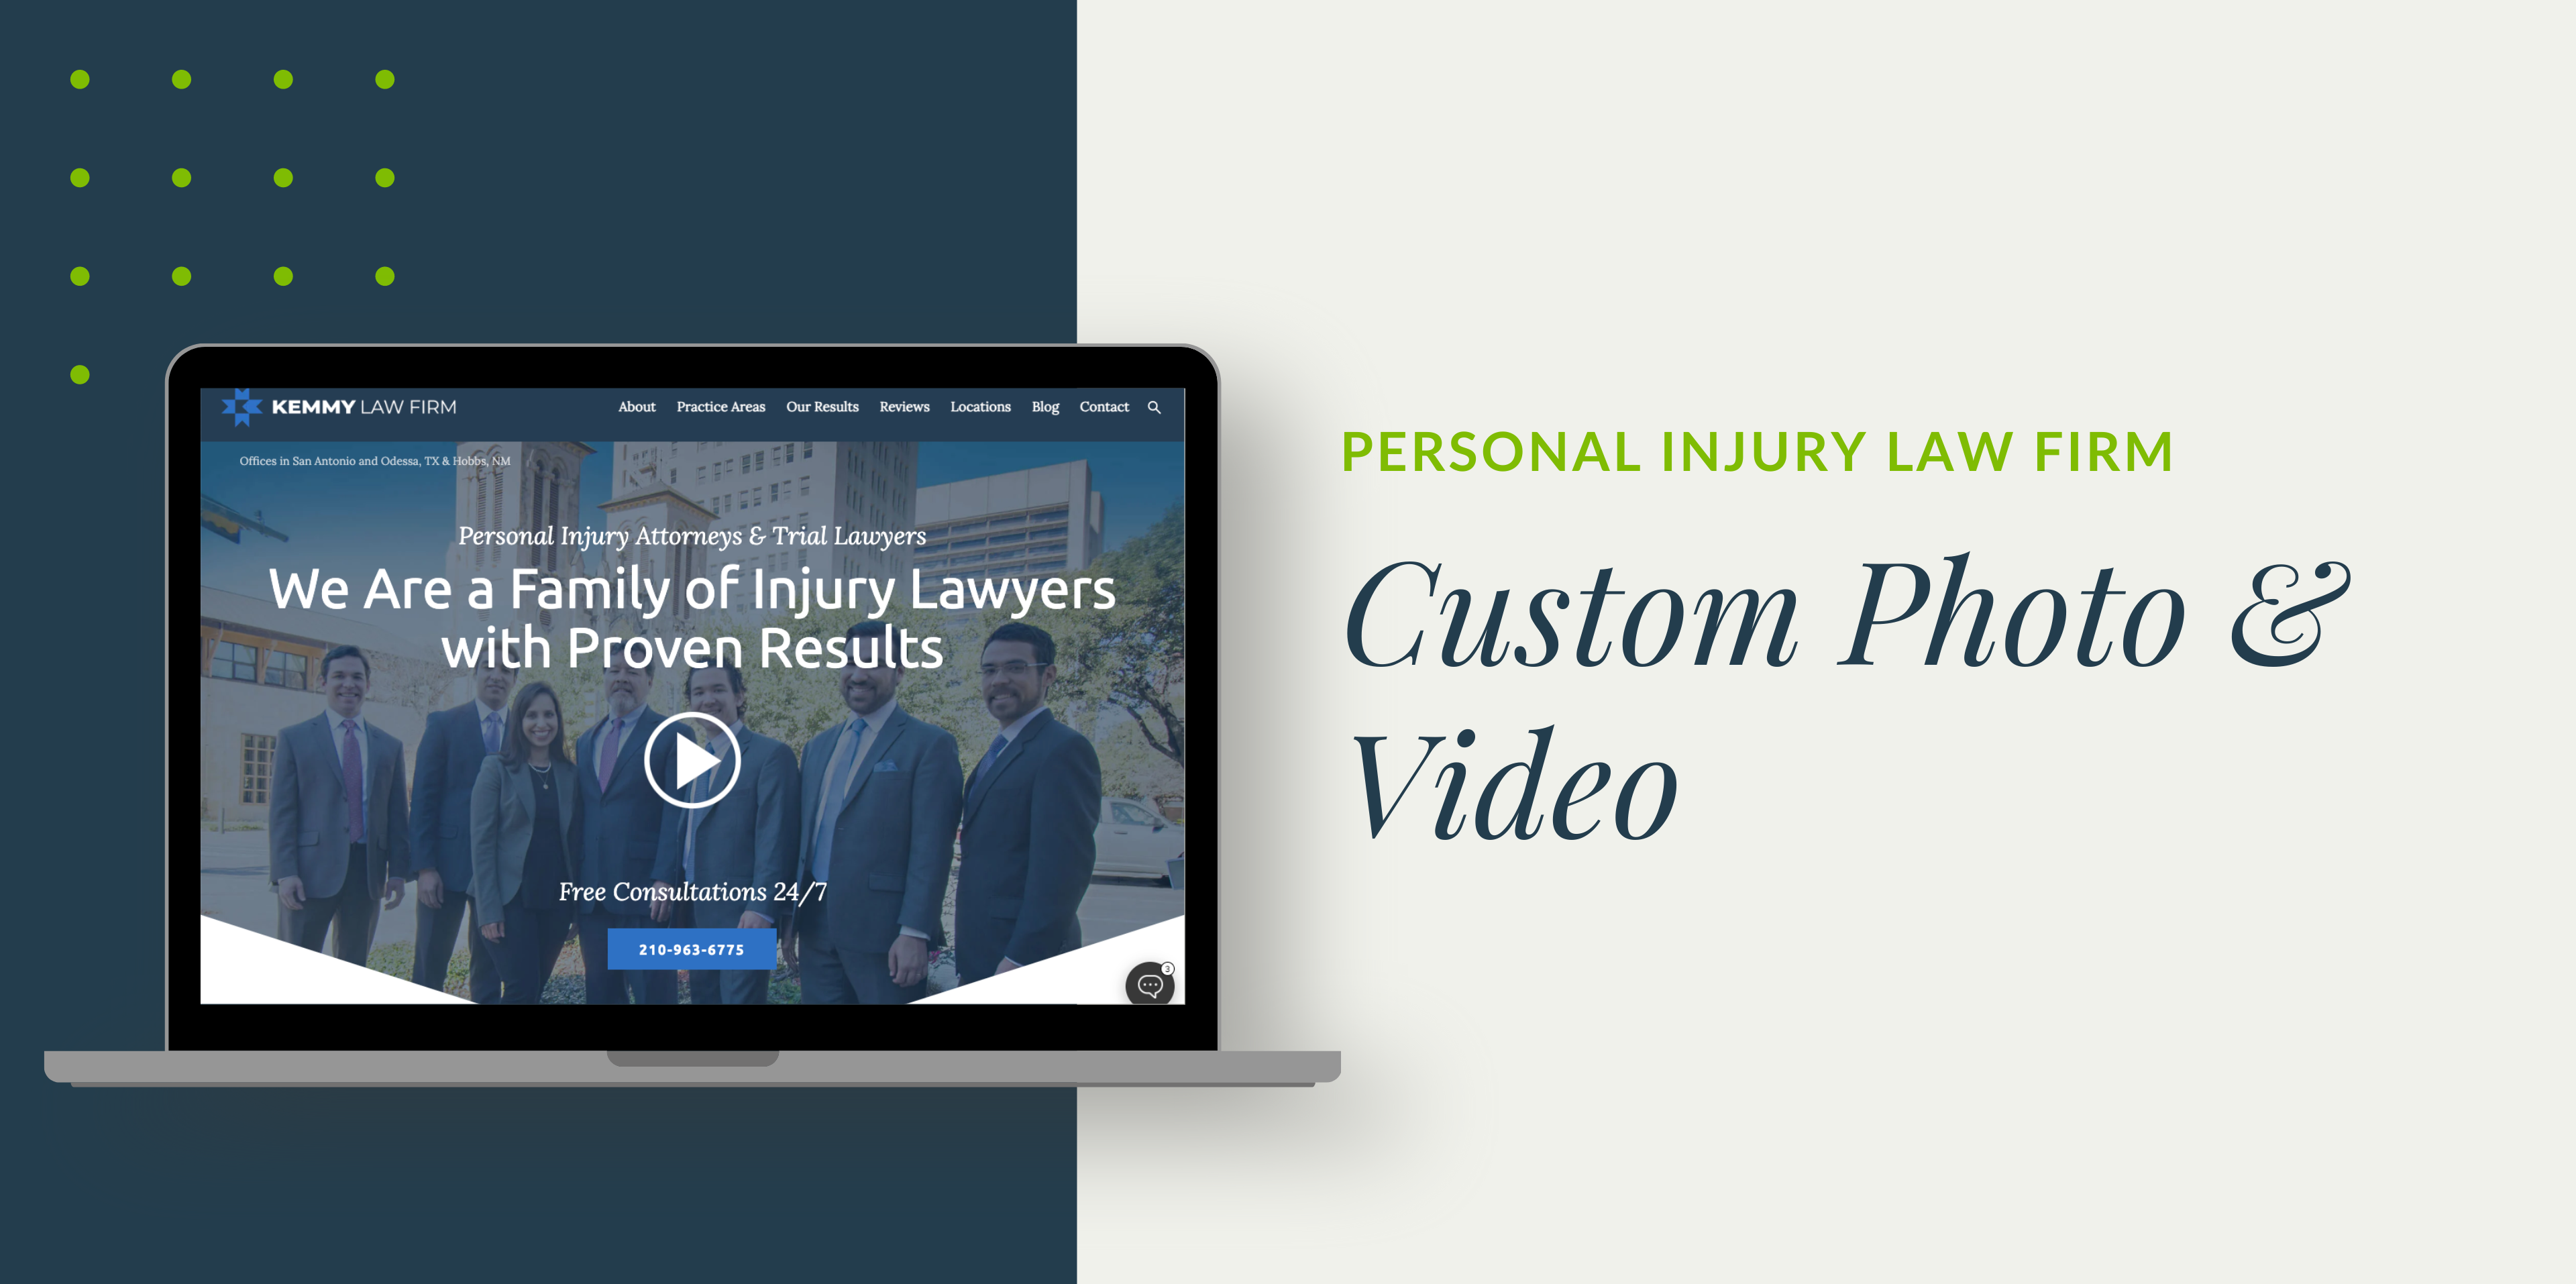 Graphic with text "Custom Photo & Video" with laptop mockup of a law firm website.